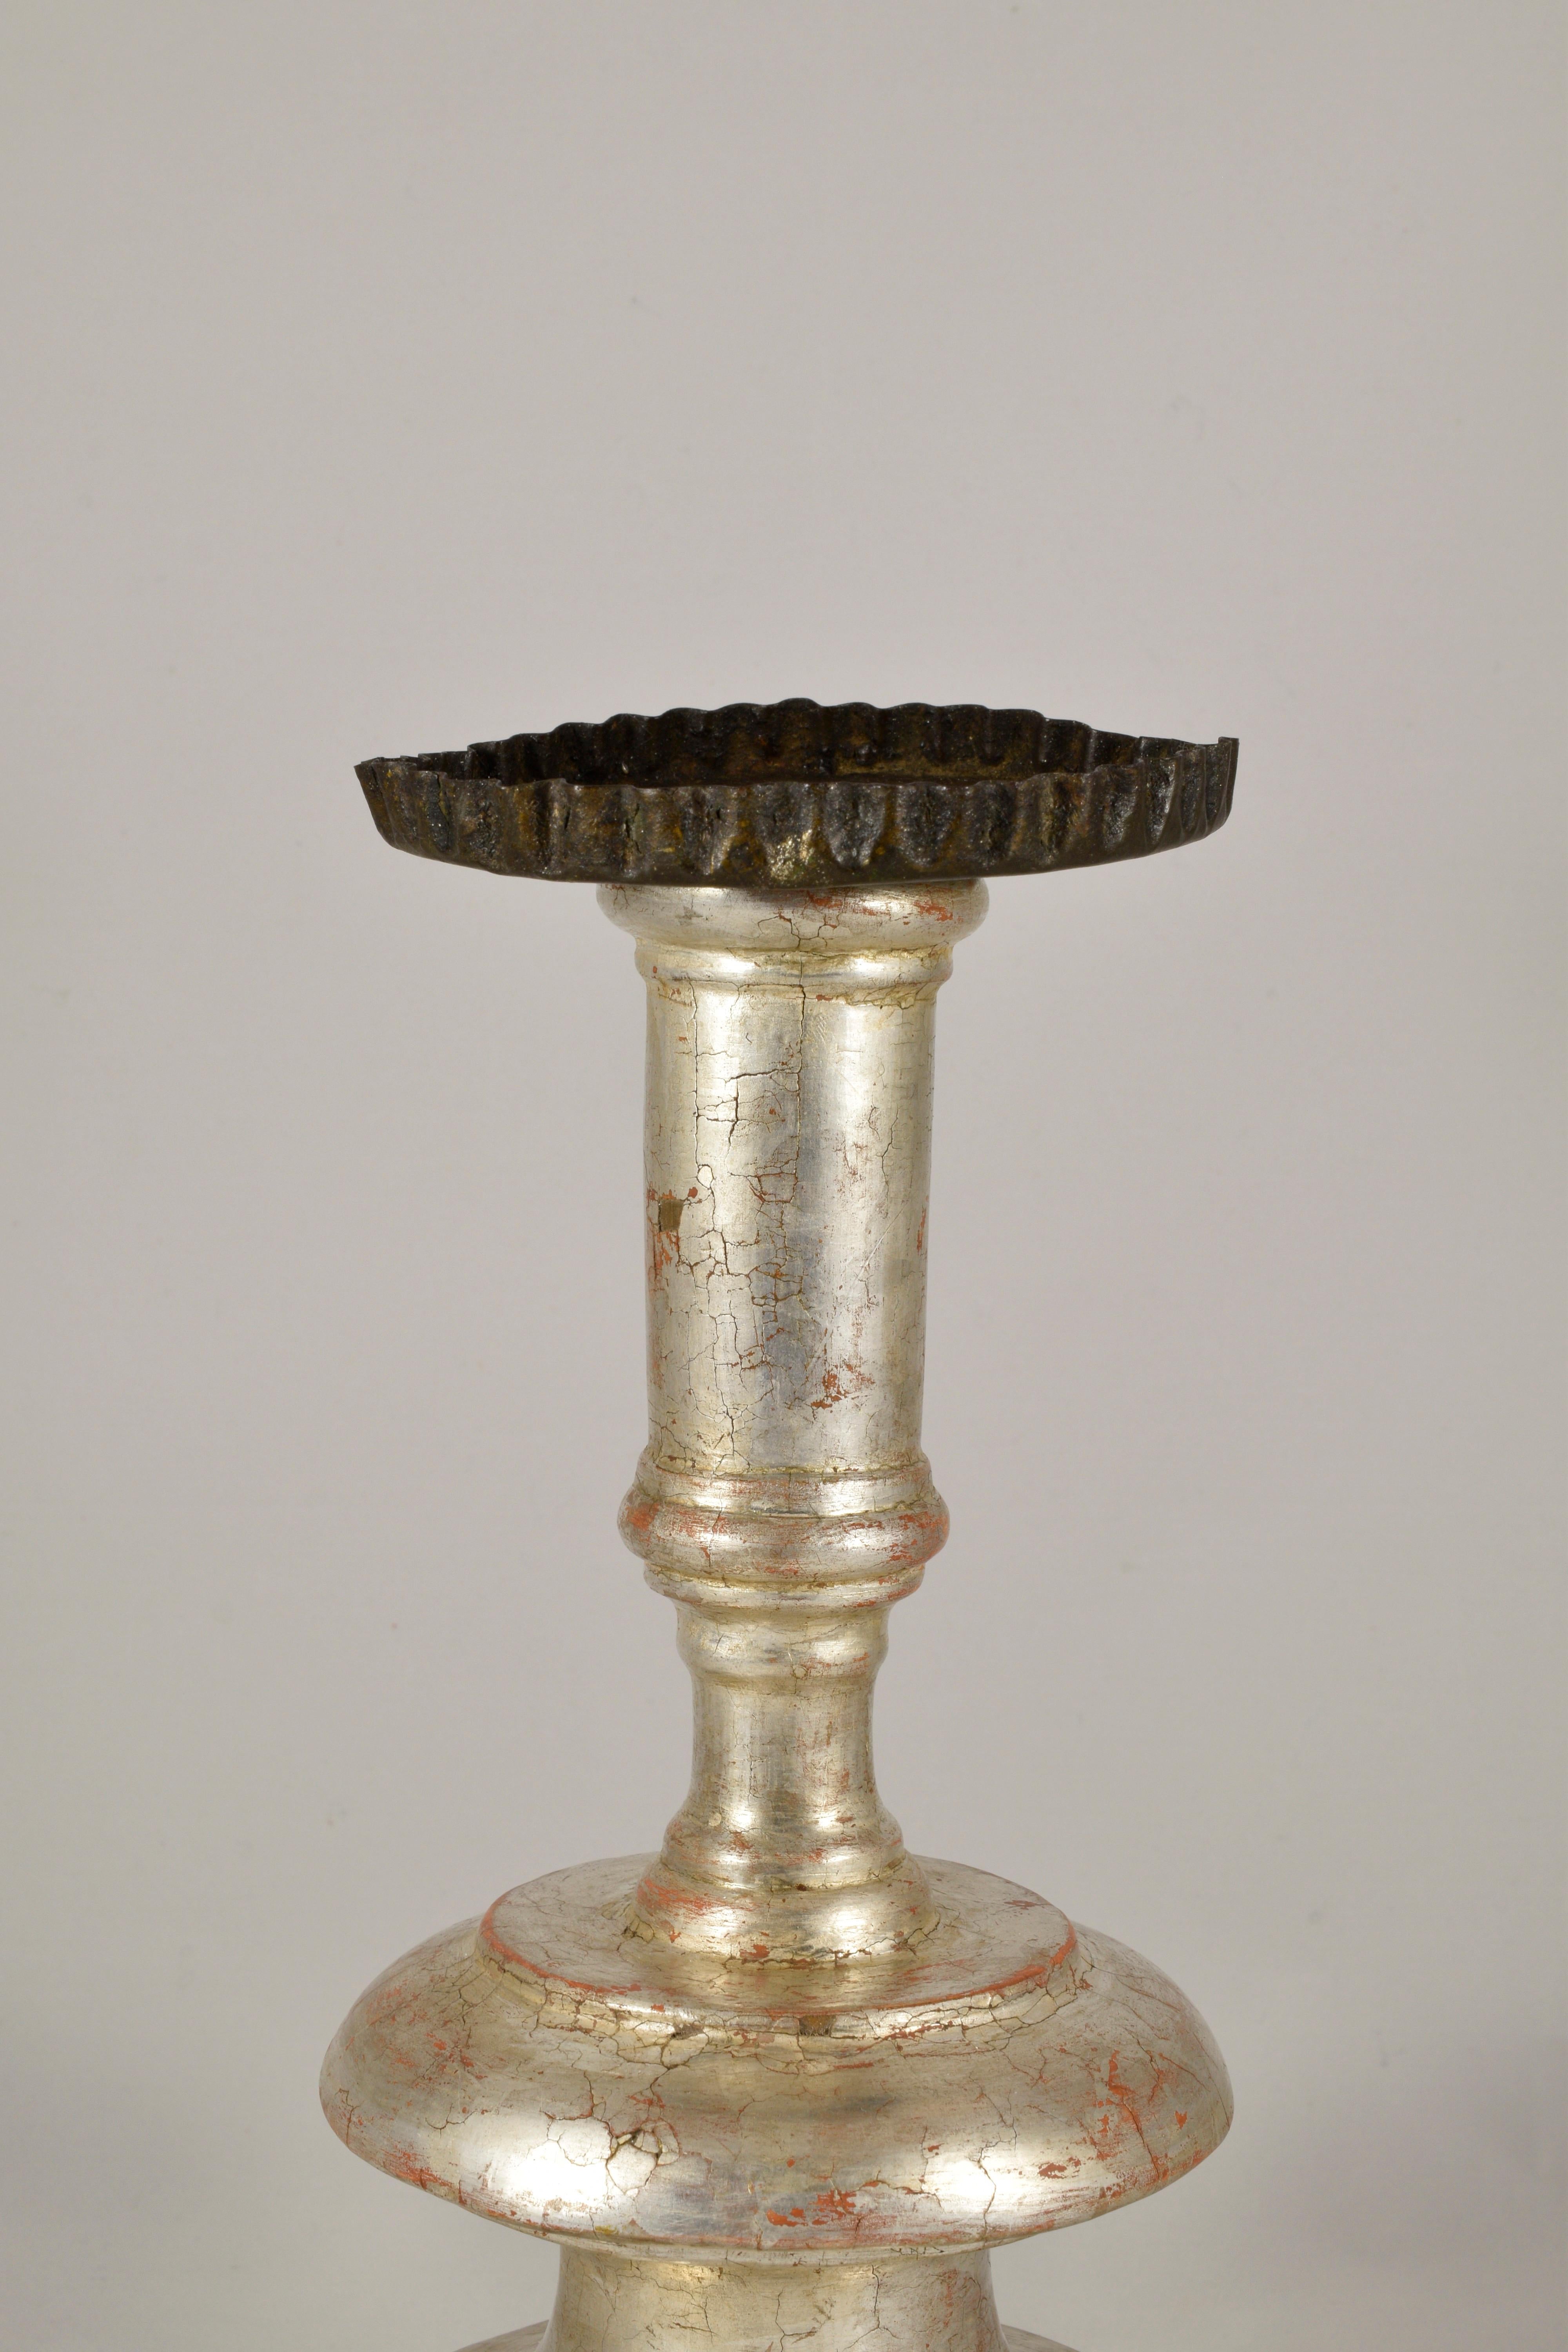 Florentine Candlestick in Lathed and Silvered Wood, Late 17th Century For Sale 1